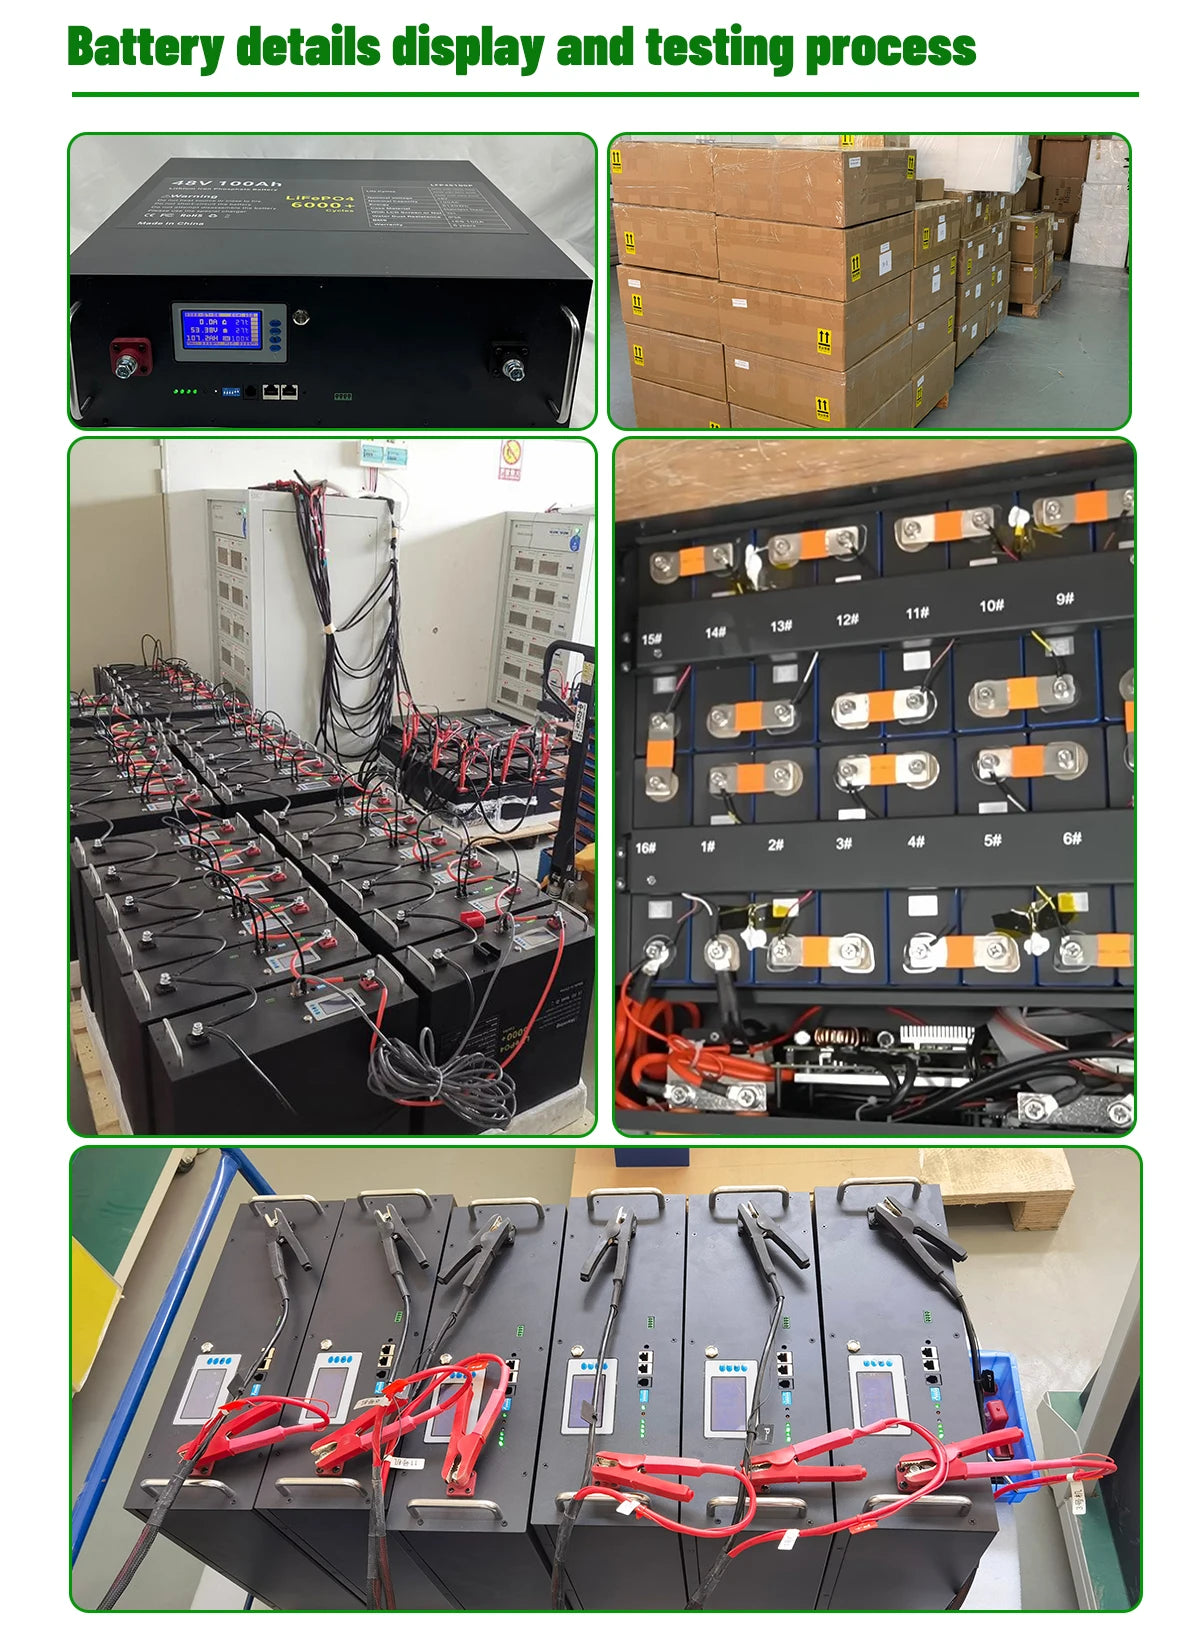 LiFePO4 48V 5KW Battery, Battery status: charging, 10% SOC, testing process, cycle count, and internal resistance details.